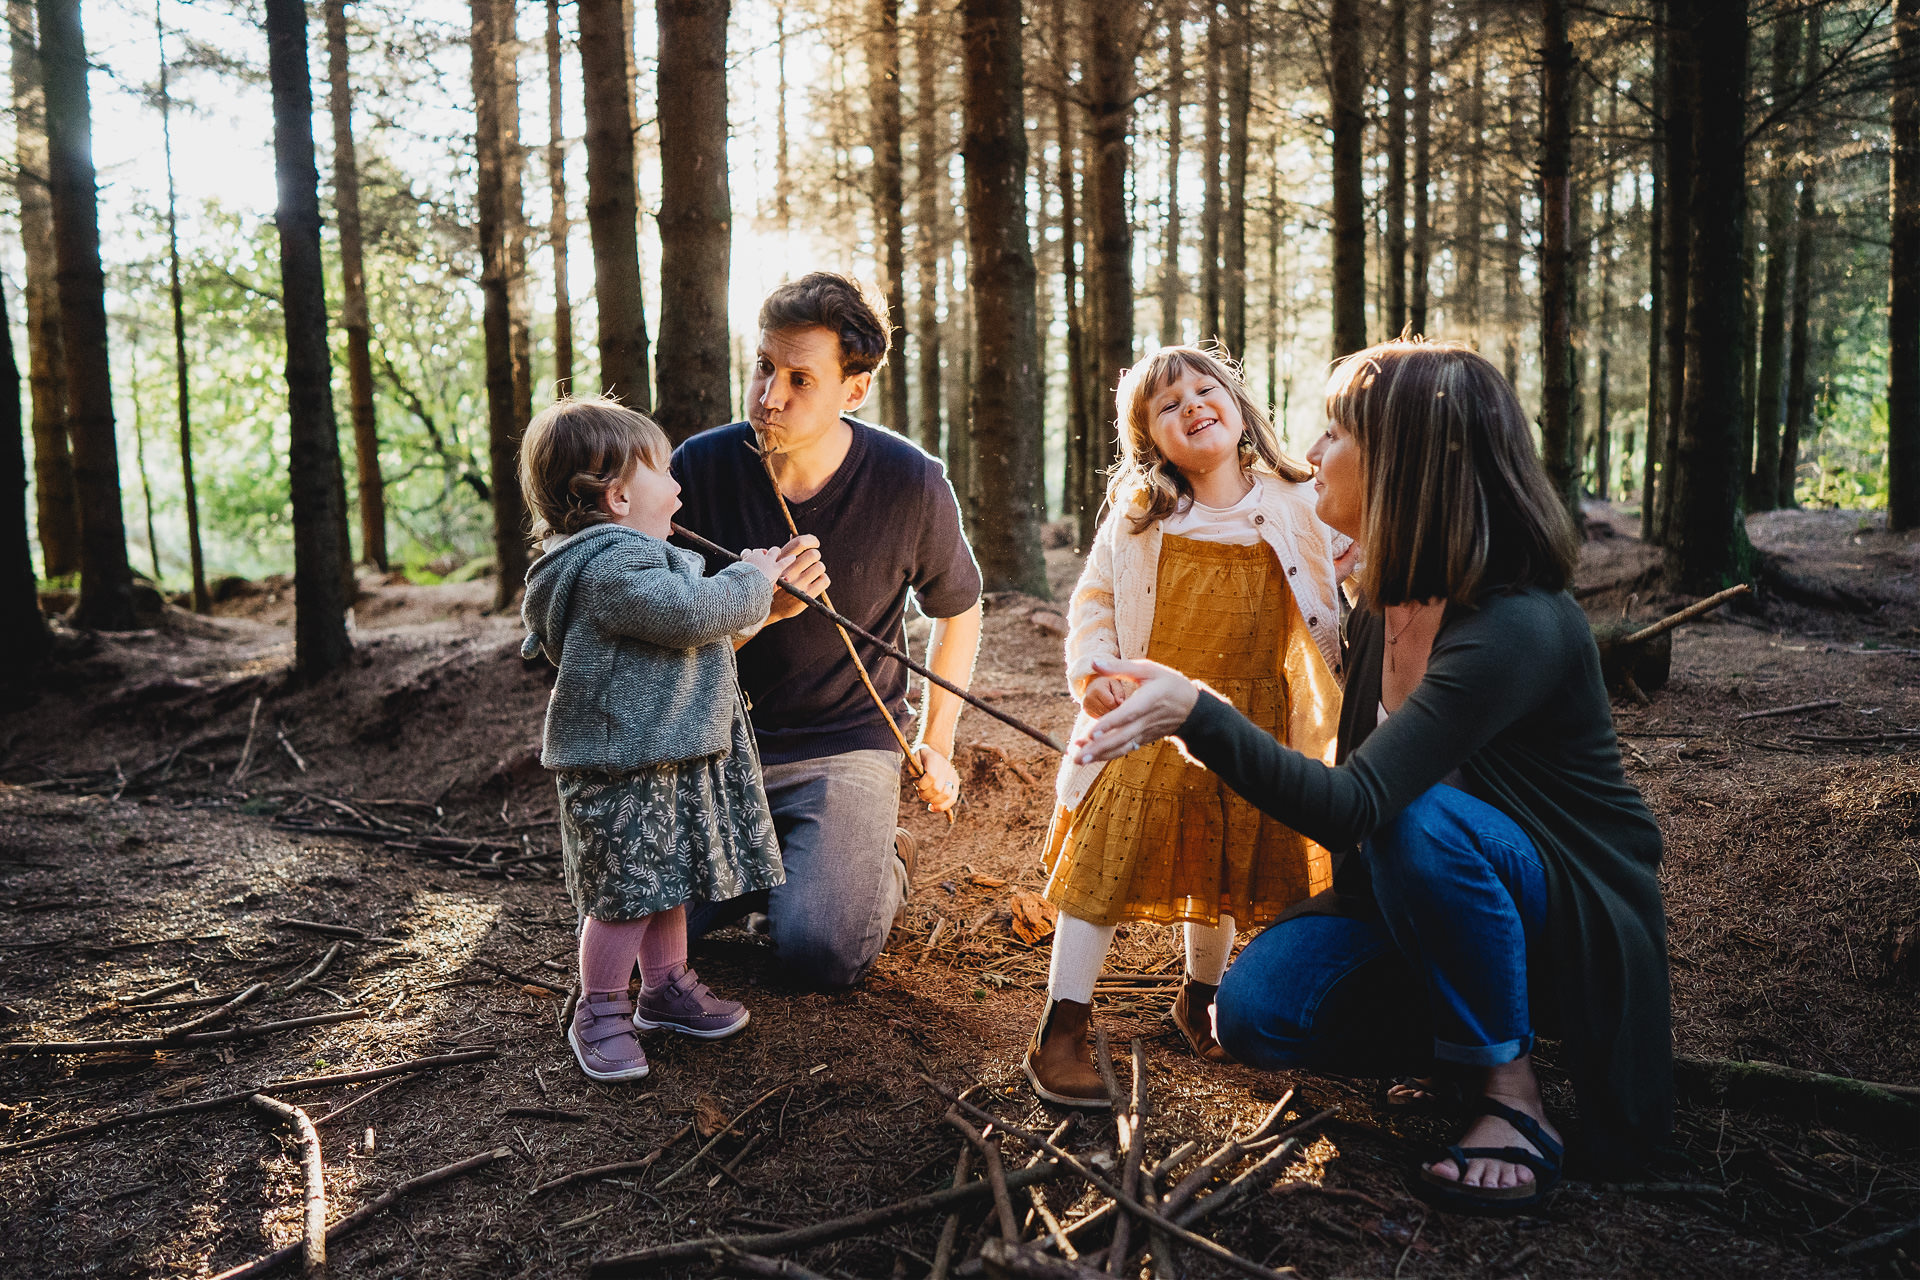 A family in the woods in evening light, with an imaginary campfire and sticks